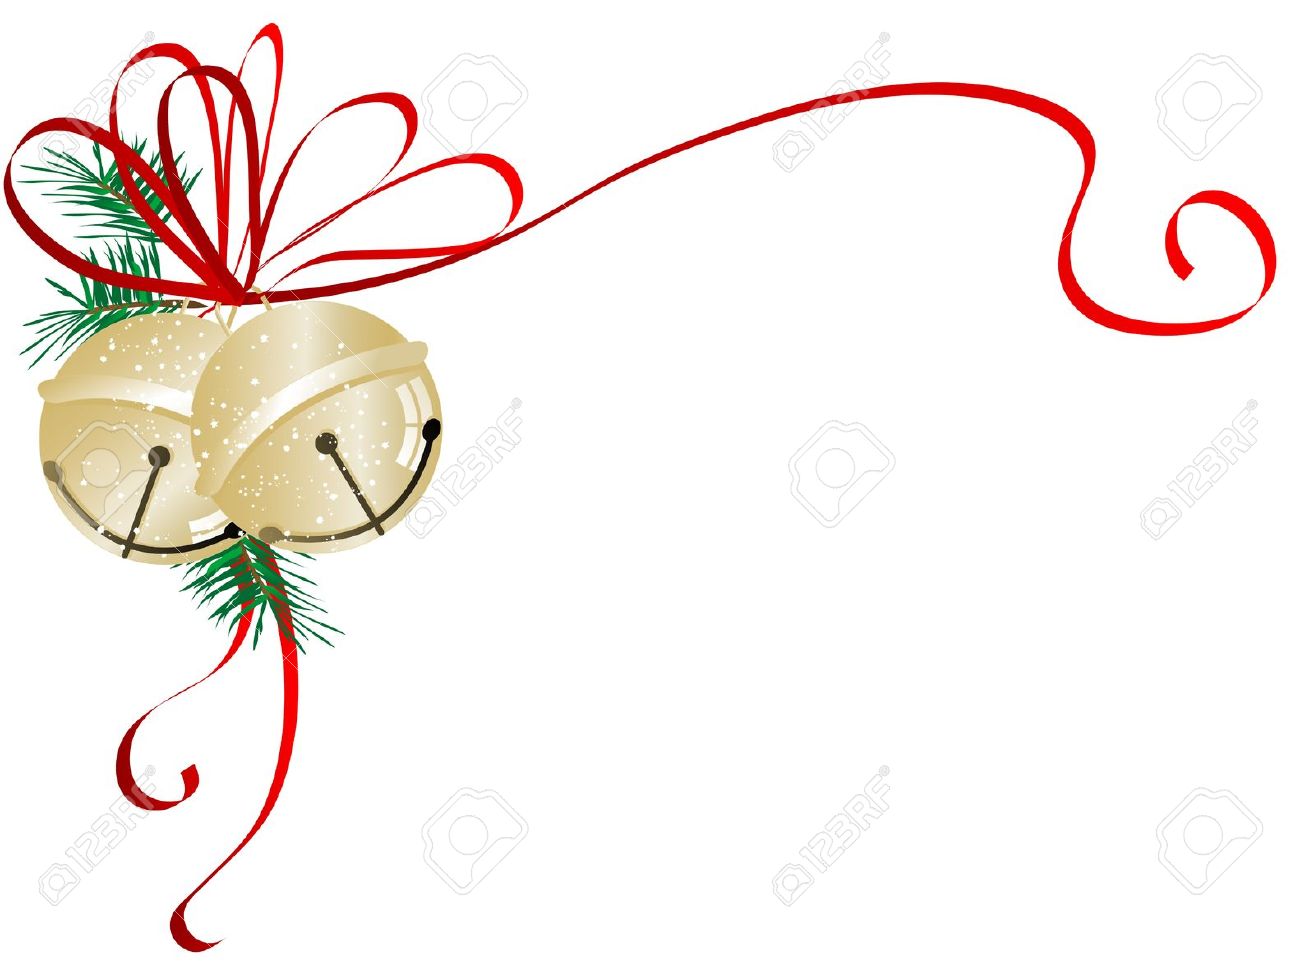 jingle bell: Two golden jingle bells with red ribbon